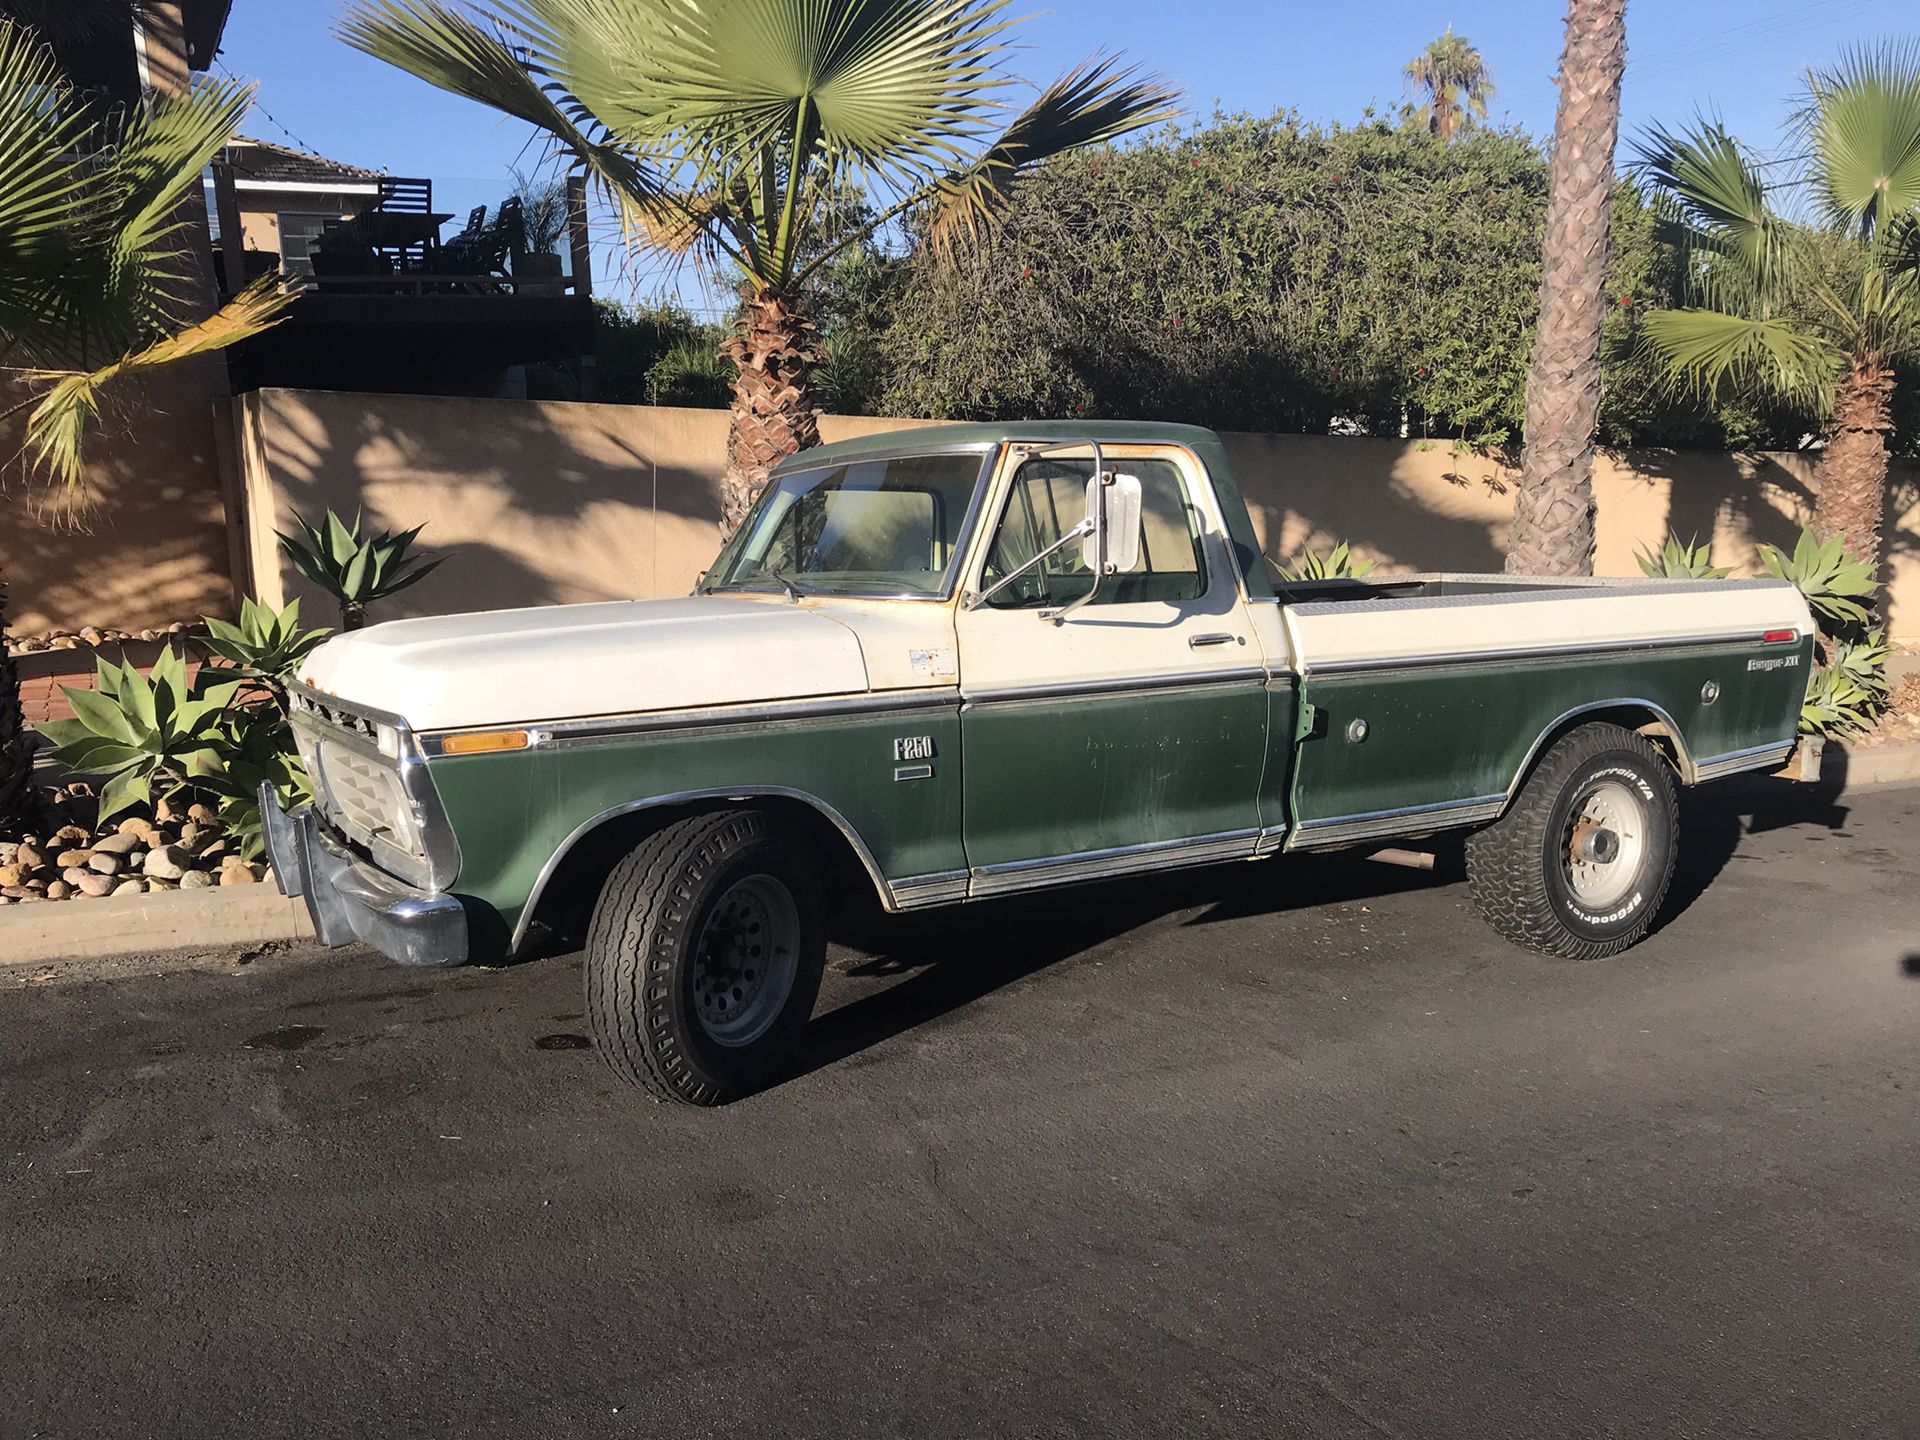 1976 250 Ford Ranger XLT sold as is